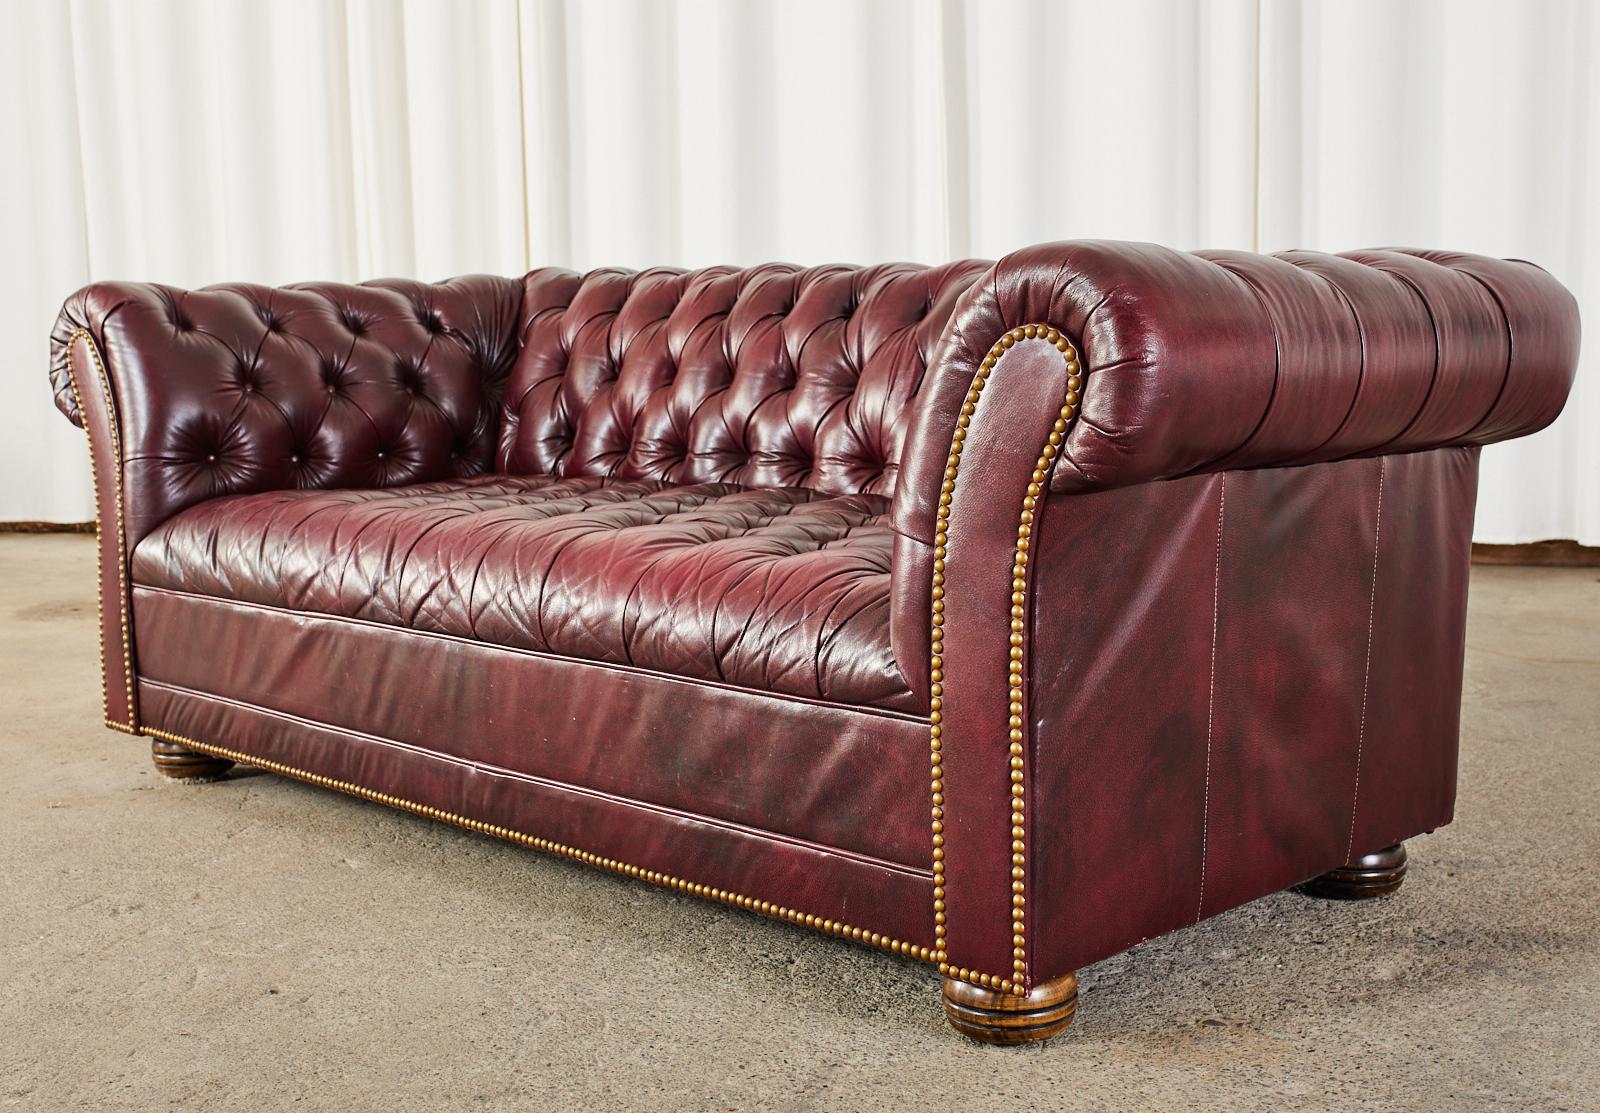 English Chesterfield Cordovan Oxblood Tufted Leather Sofa 3